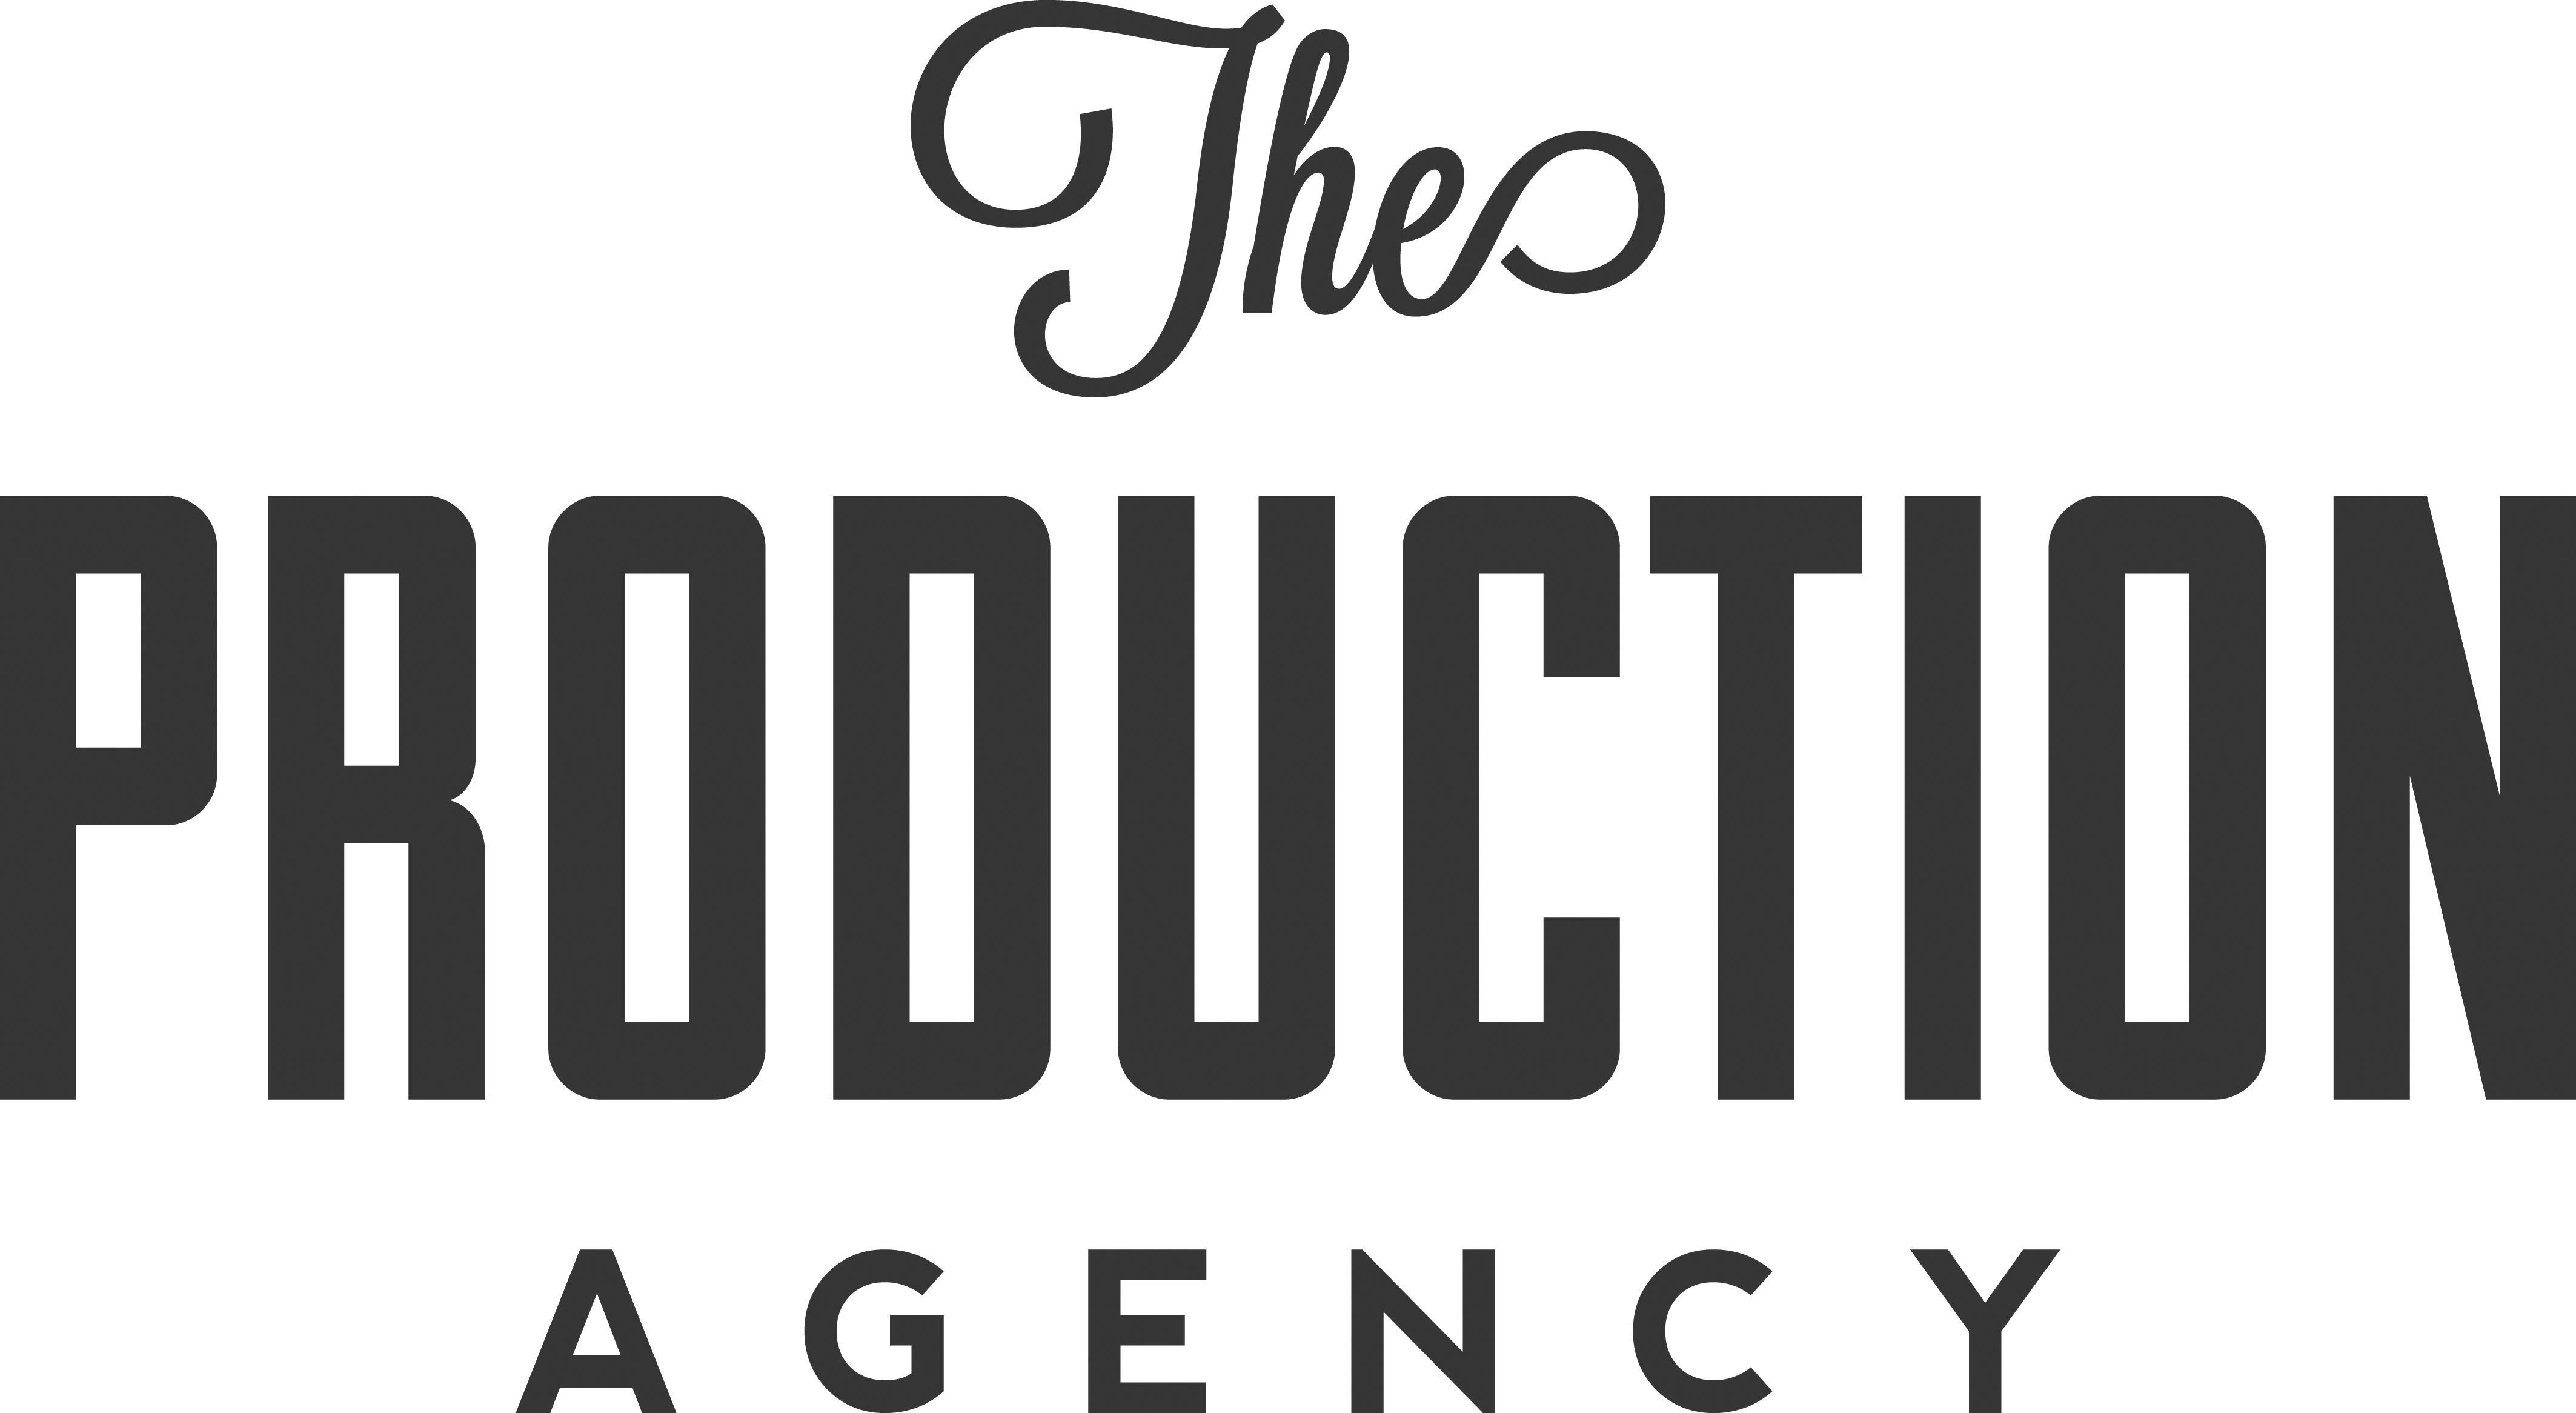 
The Production Agency